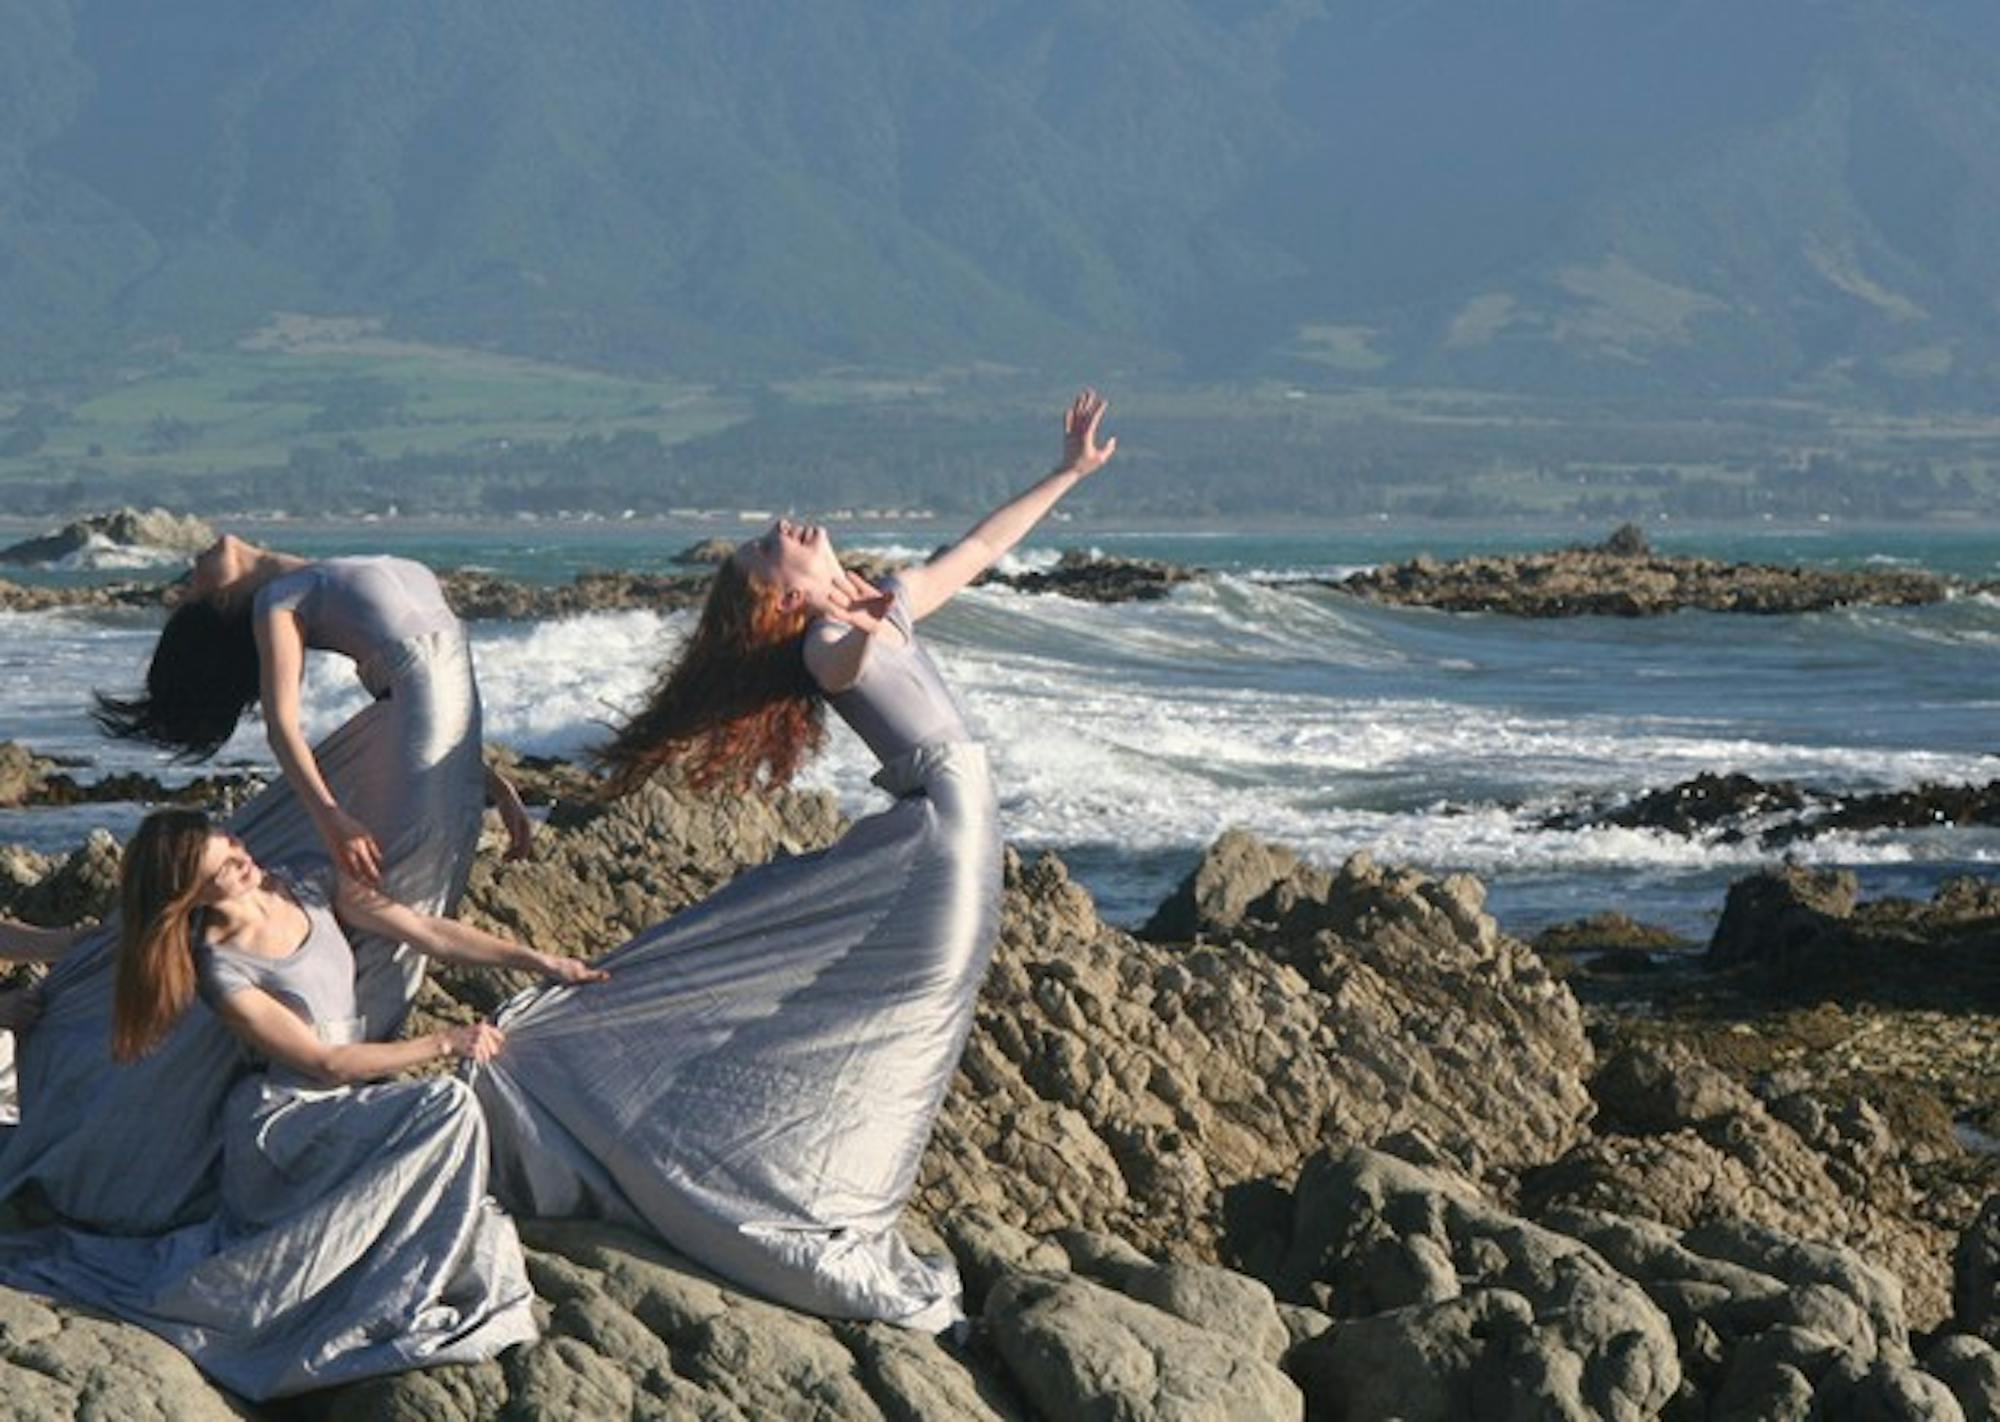 Members of the ensemble, depicted here in New Zealand, spent spring break learning traditional Maori dances.